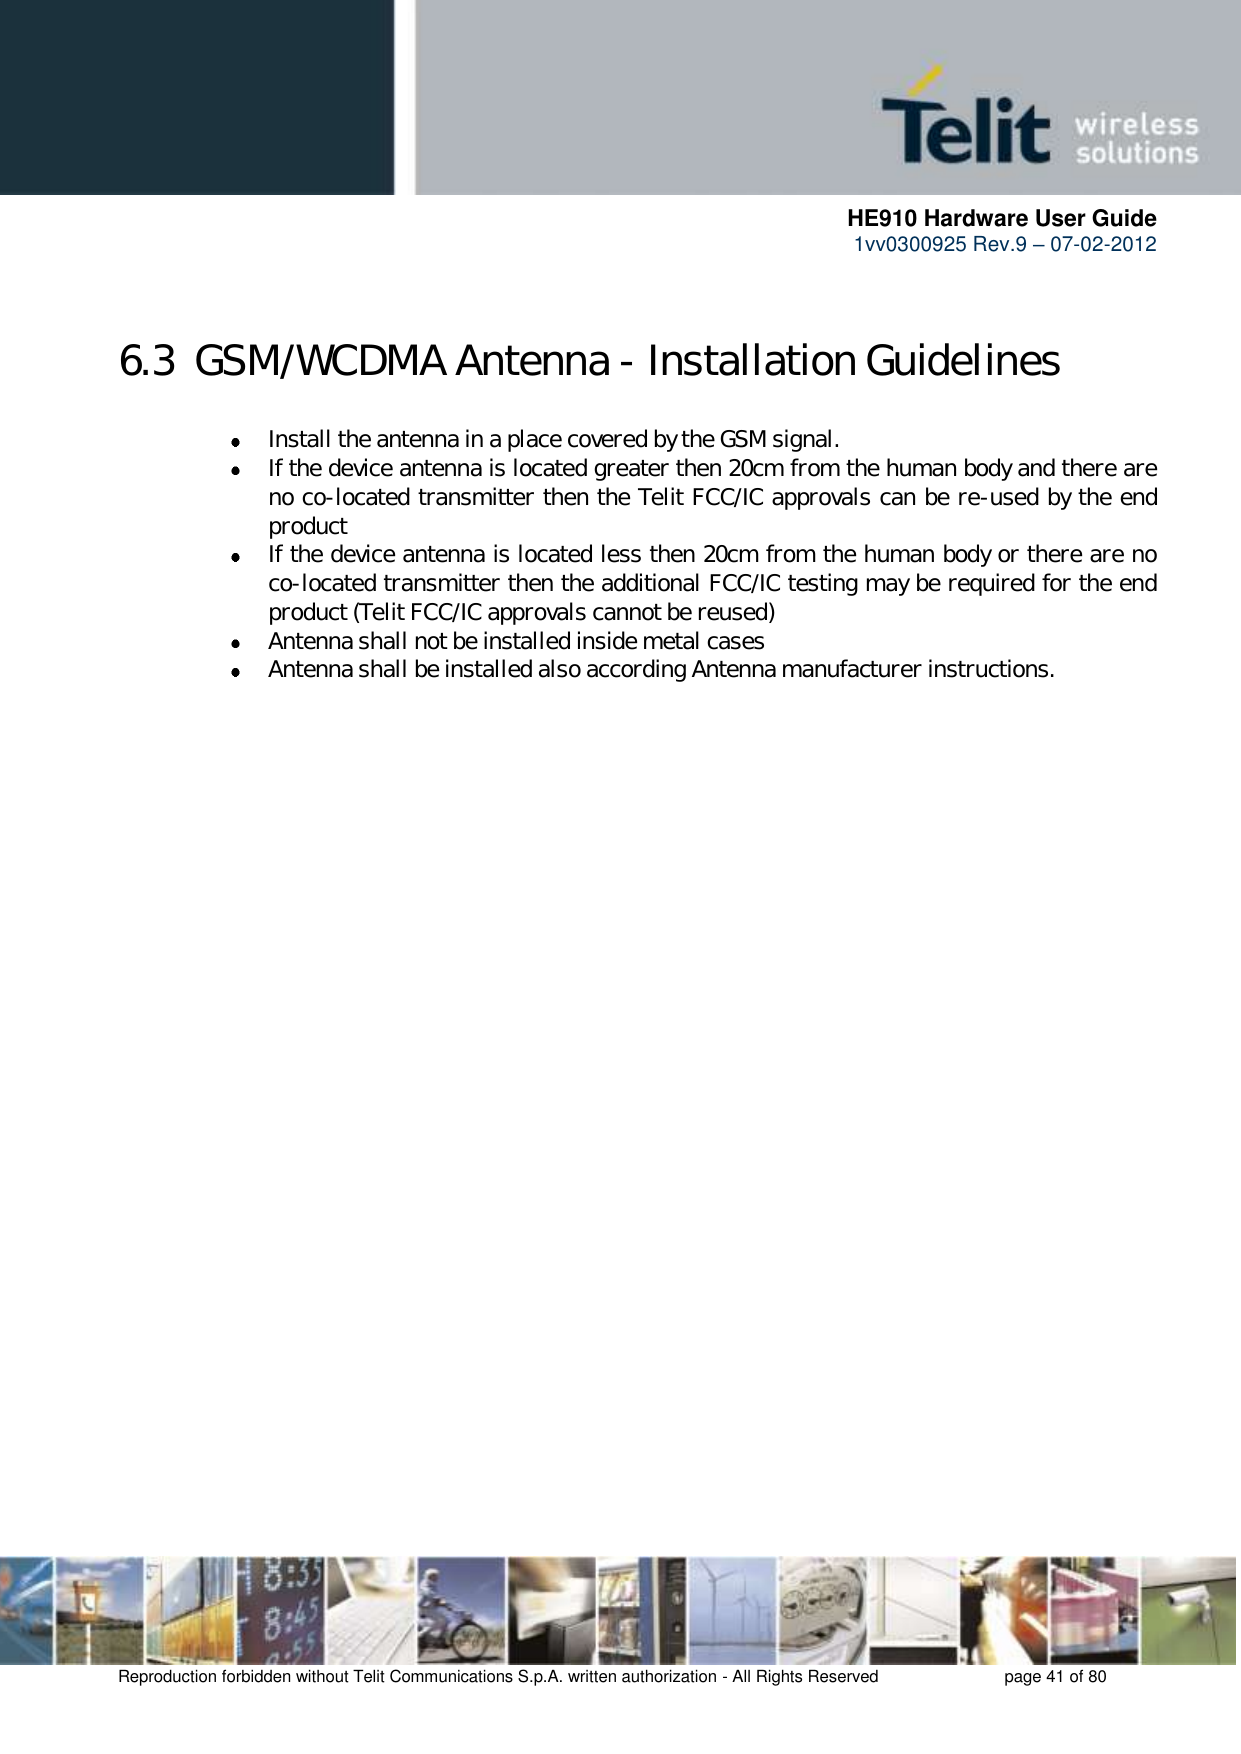      HE910 Hardware User Guide 1vv0300925 Rev.9 – 07-02-2012    Reproduction forbidden without Telit Communications S.p.A. written authorization - All Rights Reserved    page 41 of 80   6.3  GSM/WCDMA Antenna - Installation Guidelines  Install the antenna in a place covered by the GSM signal.  If the device antenna is located greater then 20cm from the human body and there are no co-located transmitter then the Telit FCC/IC approvals can be re-used by the end product  If the device antenna is located less then 20cm from the human body or there are no co-located transmitter then the additional FCC/IC testing may be required for the end product (Telit FCC/IC approvals cannot be reused)  Antenna shall not be installed inside metal cases   Antenna shall be installed also according Antenna manufacturer instructions.  